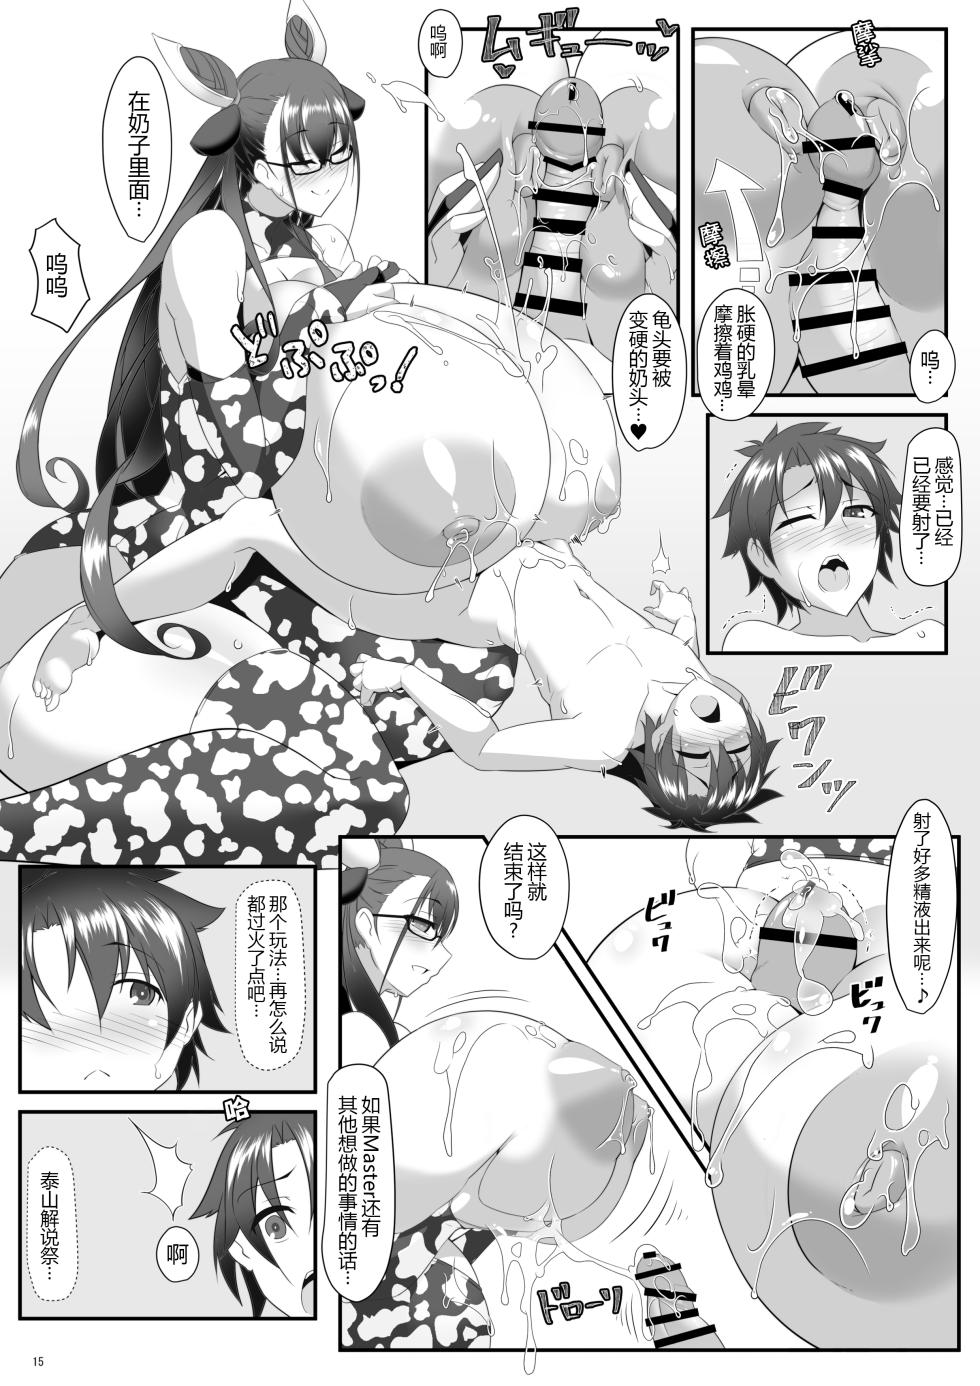 [IRON FIN (Tethubire)] Shisho to Hitomi au (Fate/Grand Order) [Chinese] [黑锅汉化组] [Digital] - Page 16